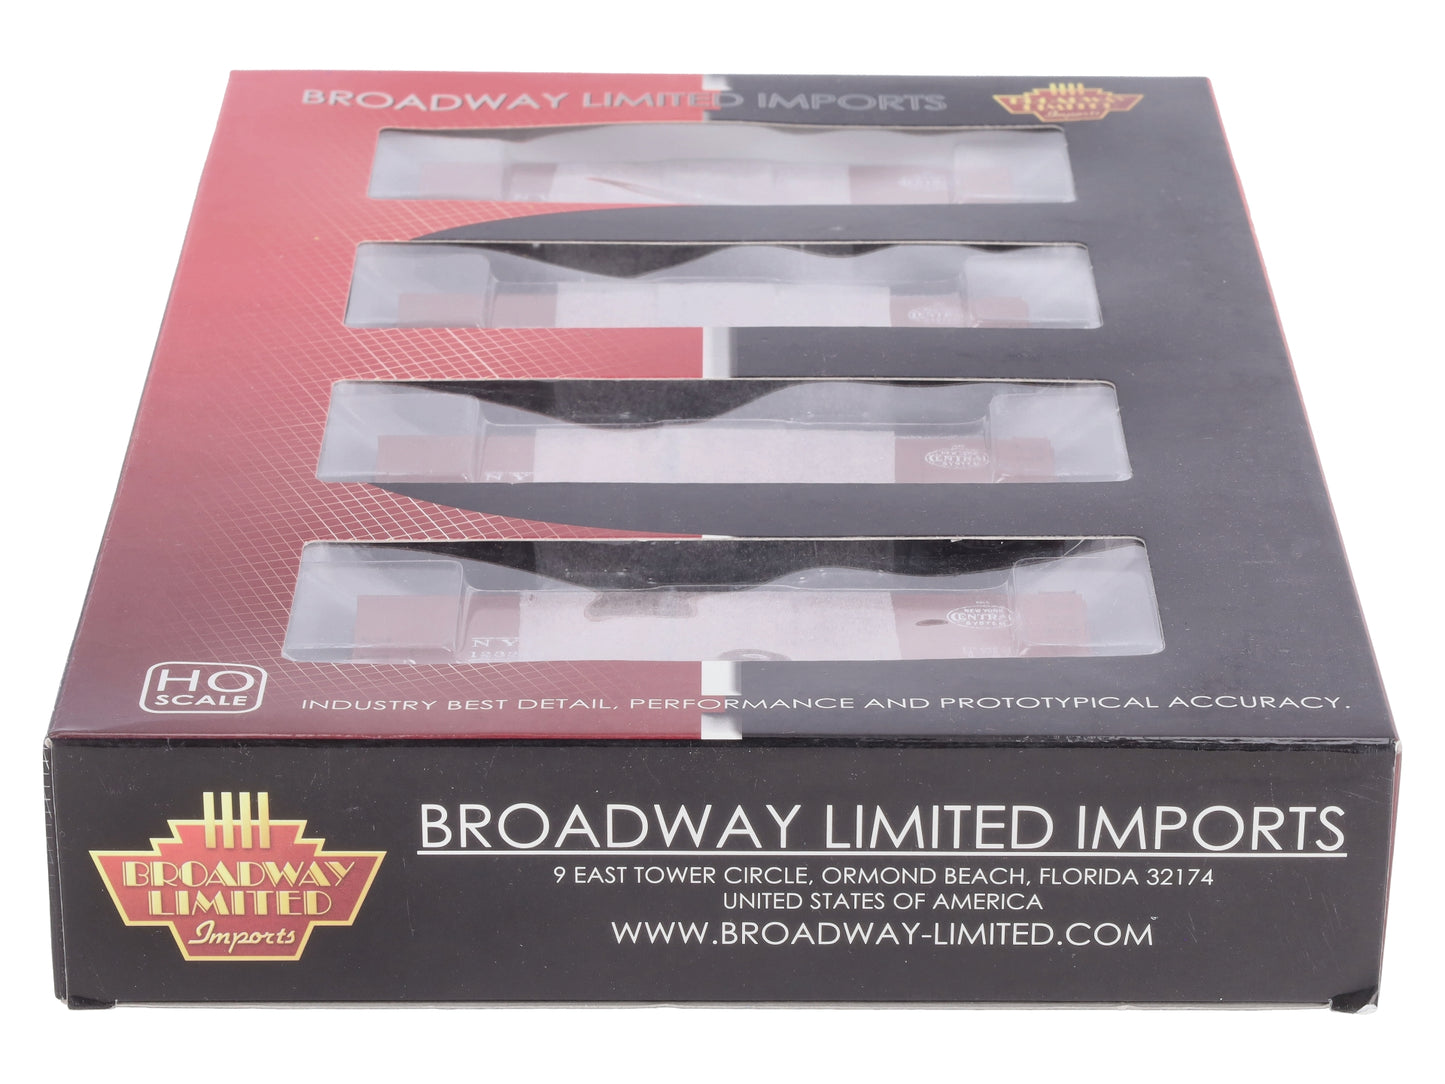 Broadway Limited 1752 HO NYC Specification 486 40' Steel Boxcar (Set of 4) NIB